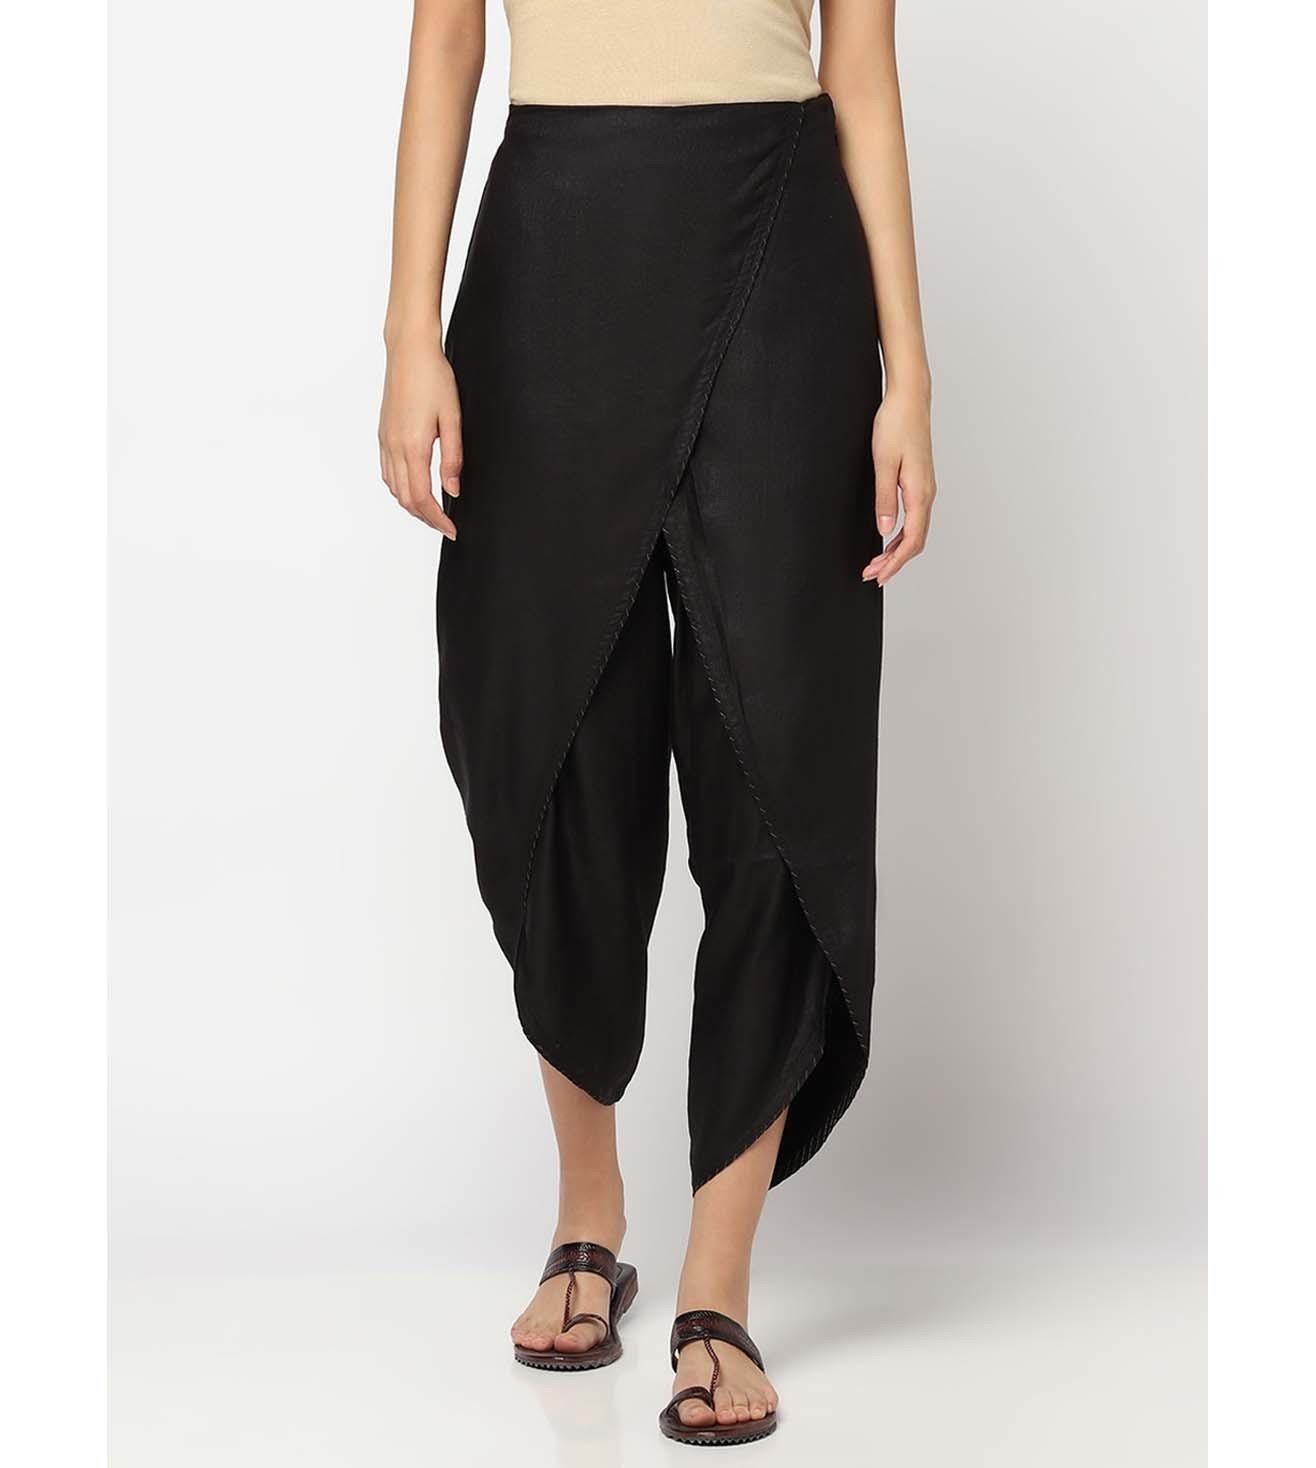 Buy Fabindia Women's Relaxed Pants (10548481_Off White_M) at Amazon.in